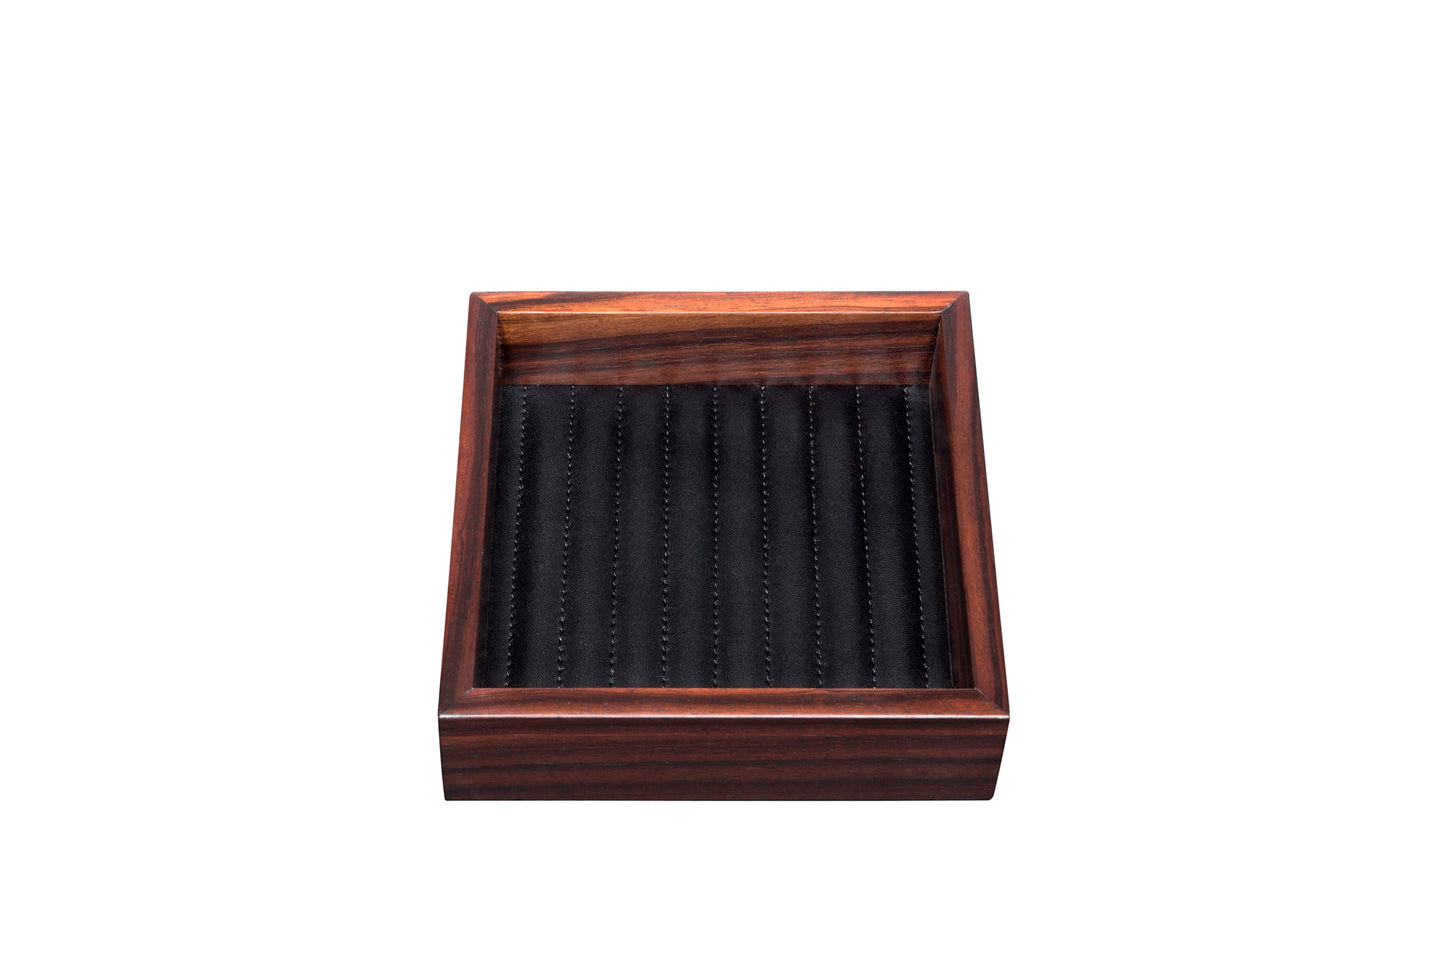 Riviere Febe Ebony Lines Square Valet Tray | Macassar Ebony Tray | Quilted Striped Lining | Perfect for Yacht Decor | Available at 2Jour Concierge, #1 luxury high-end gift & lifestyle shop